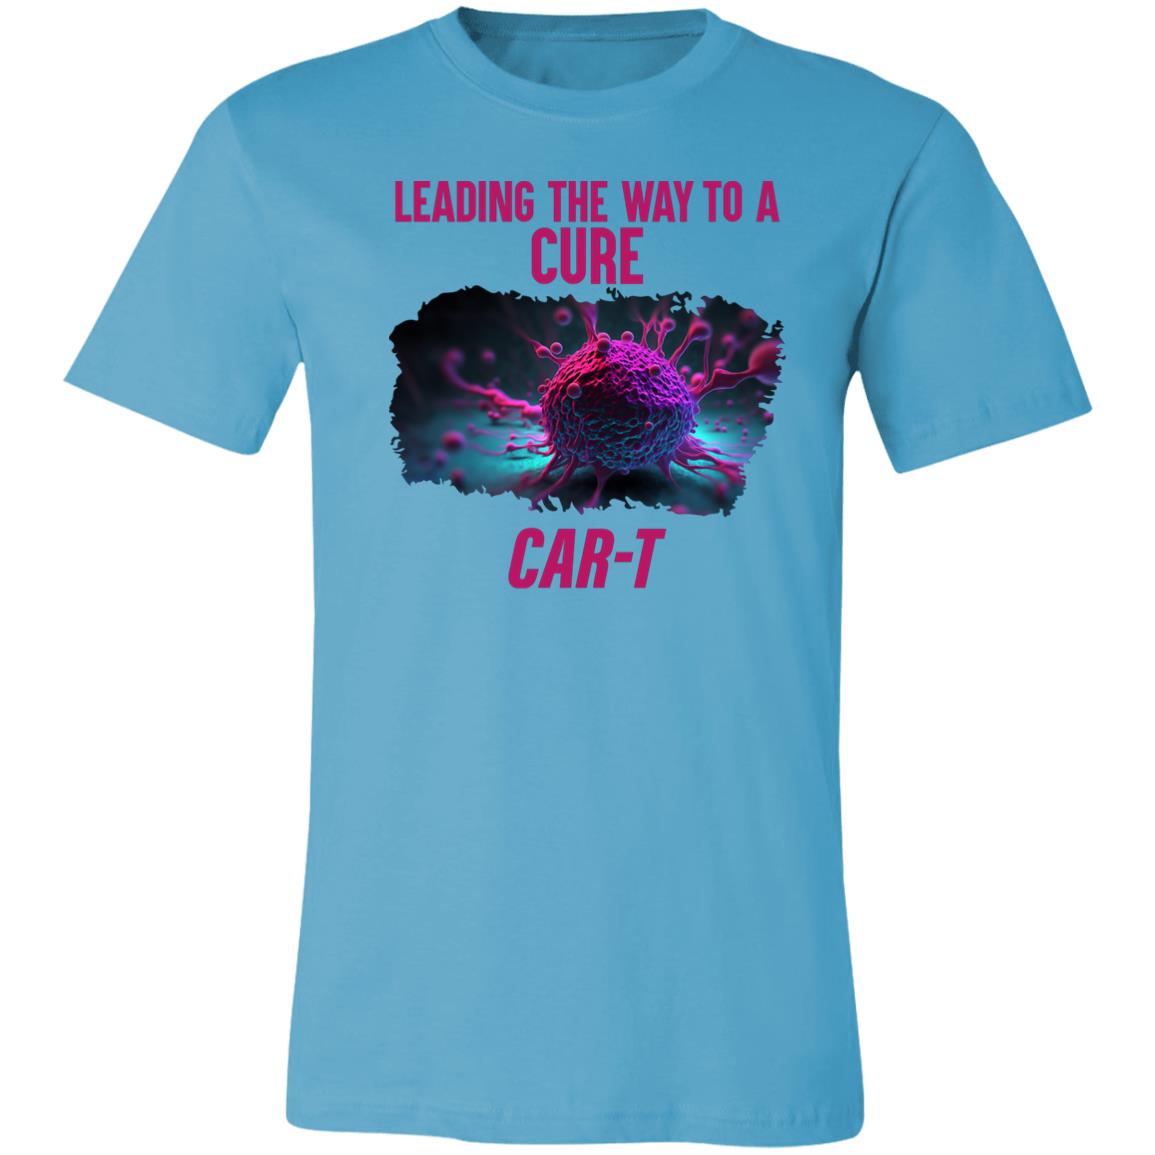 Leading the Way to a Cure! Unisex  T-Shirt